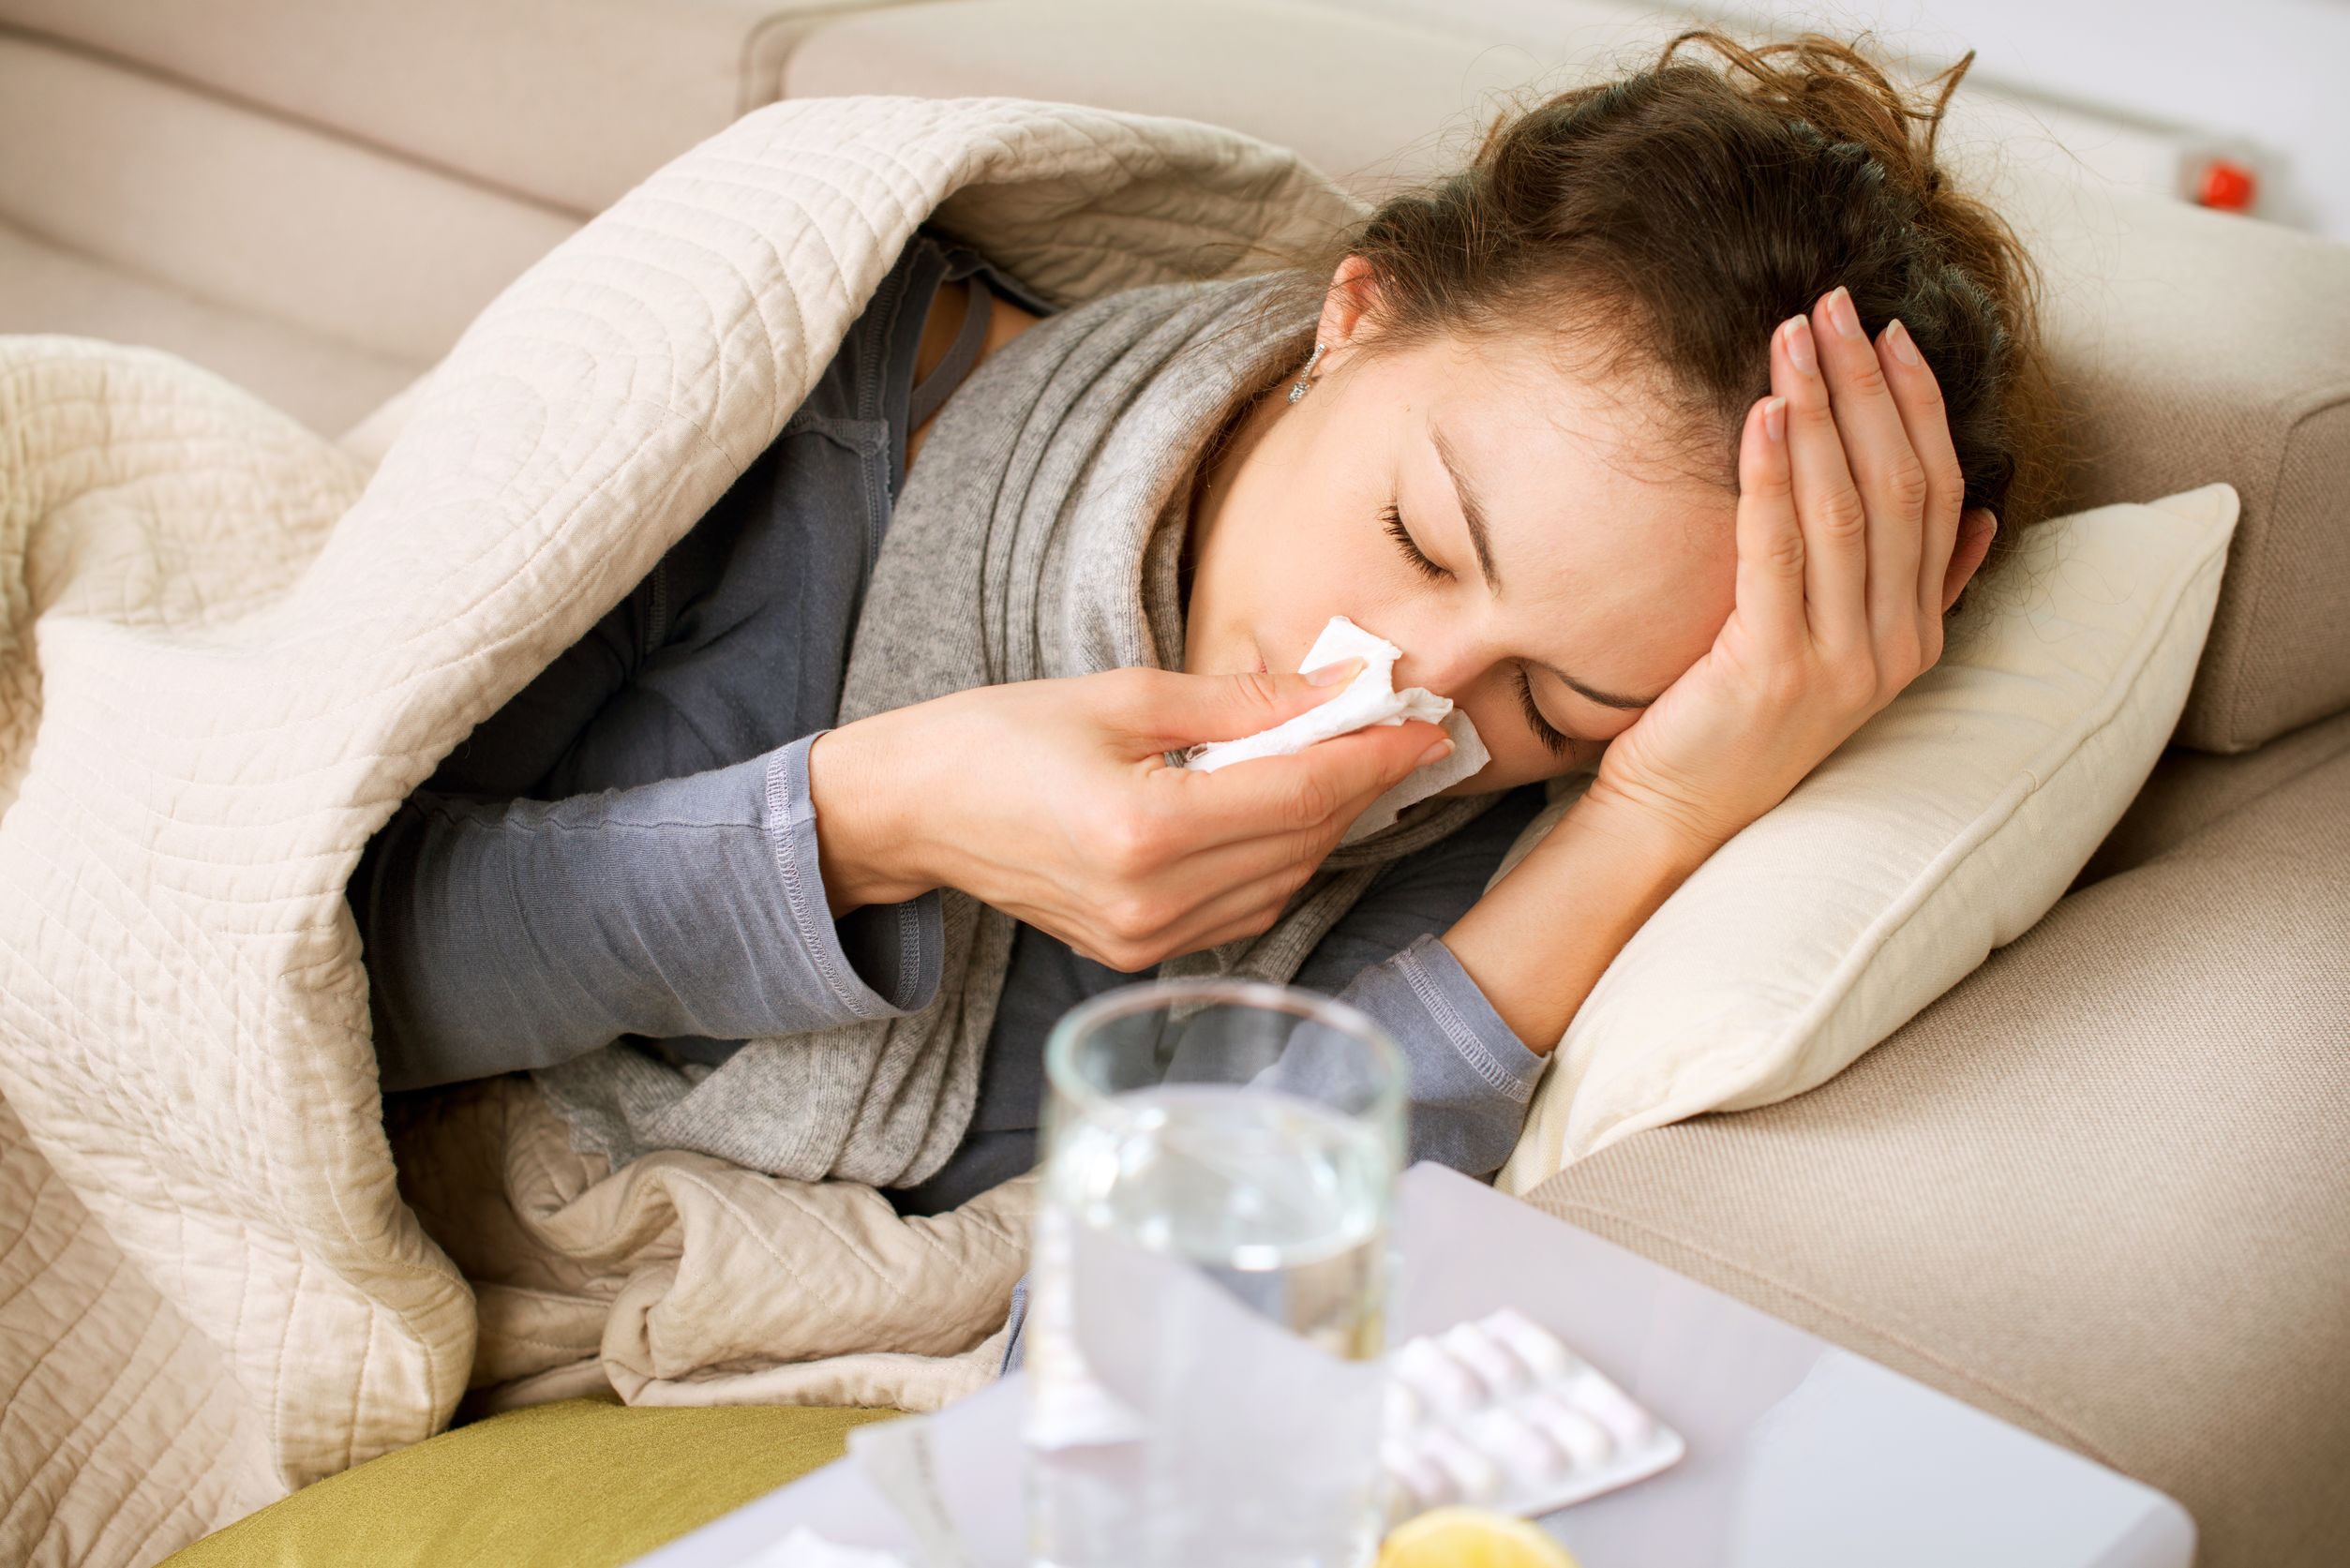 8 Common Ways You Can Make a Cold Worse